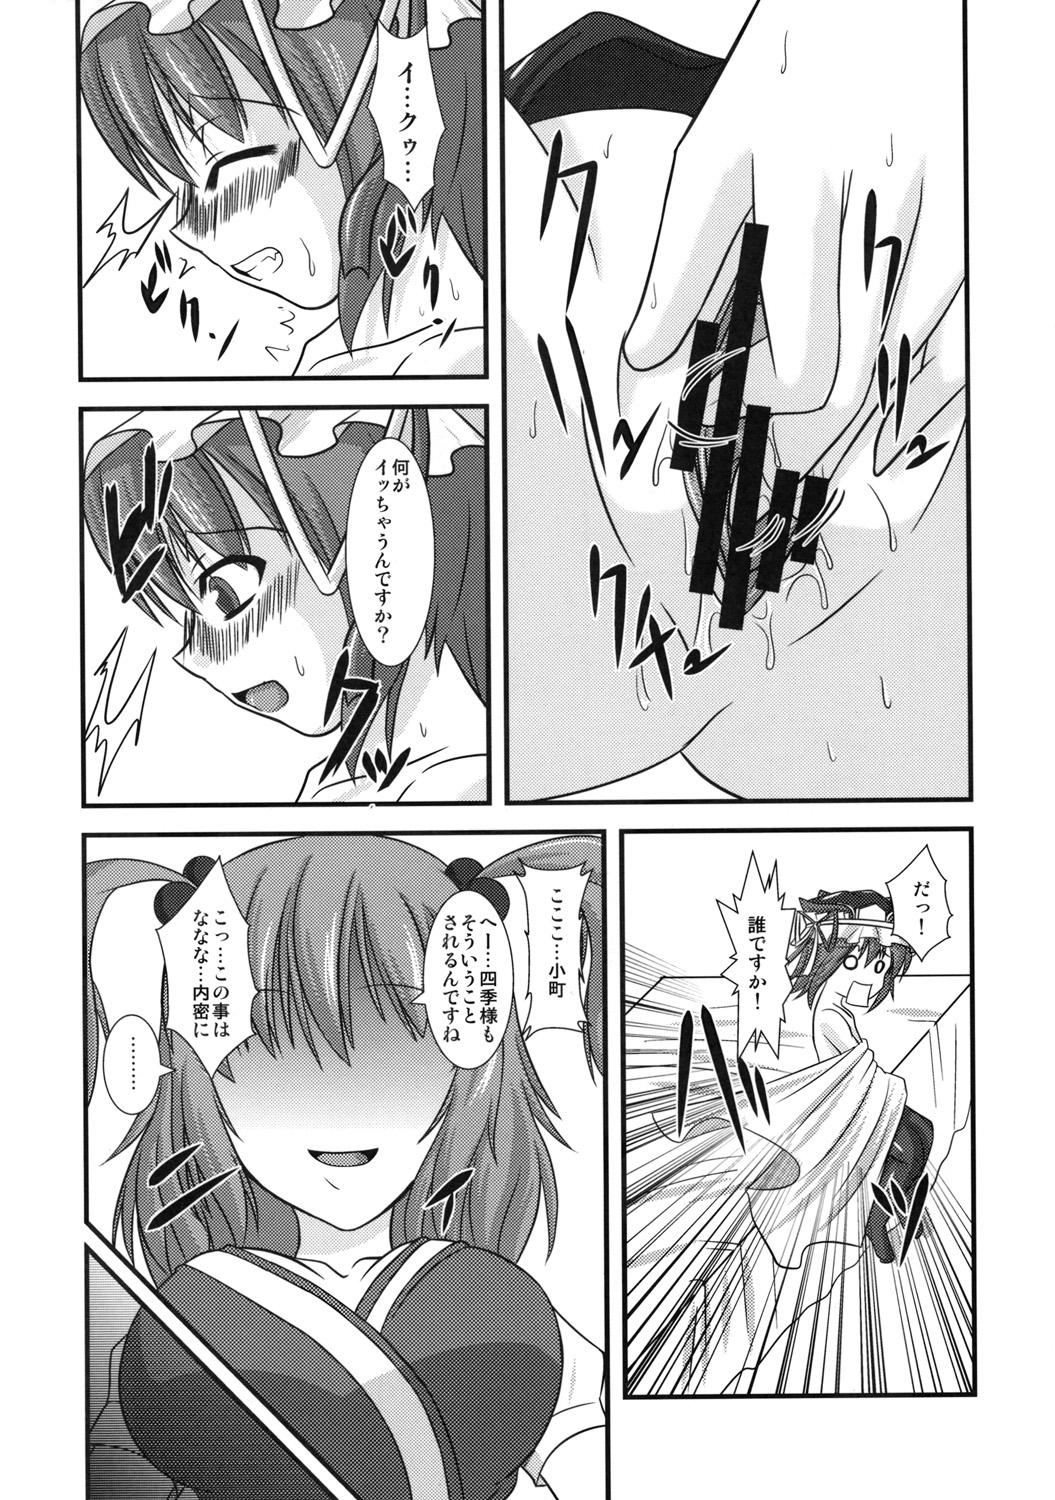 Seduction Porn 主従反転 - Touhou project Climax - Page 5